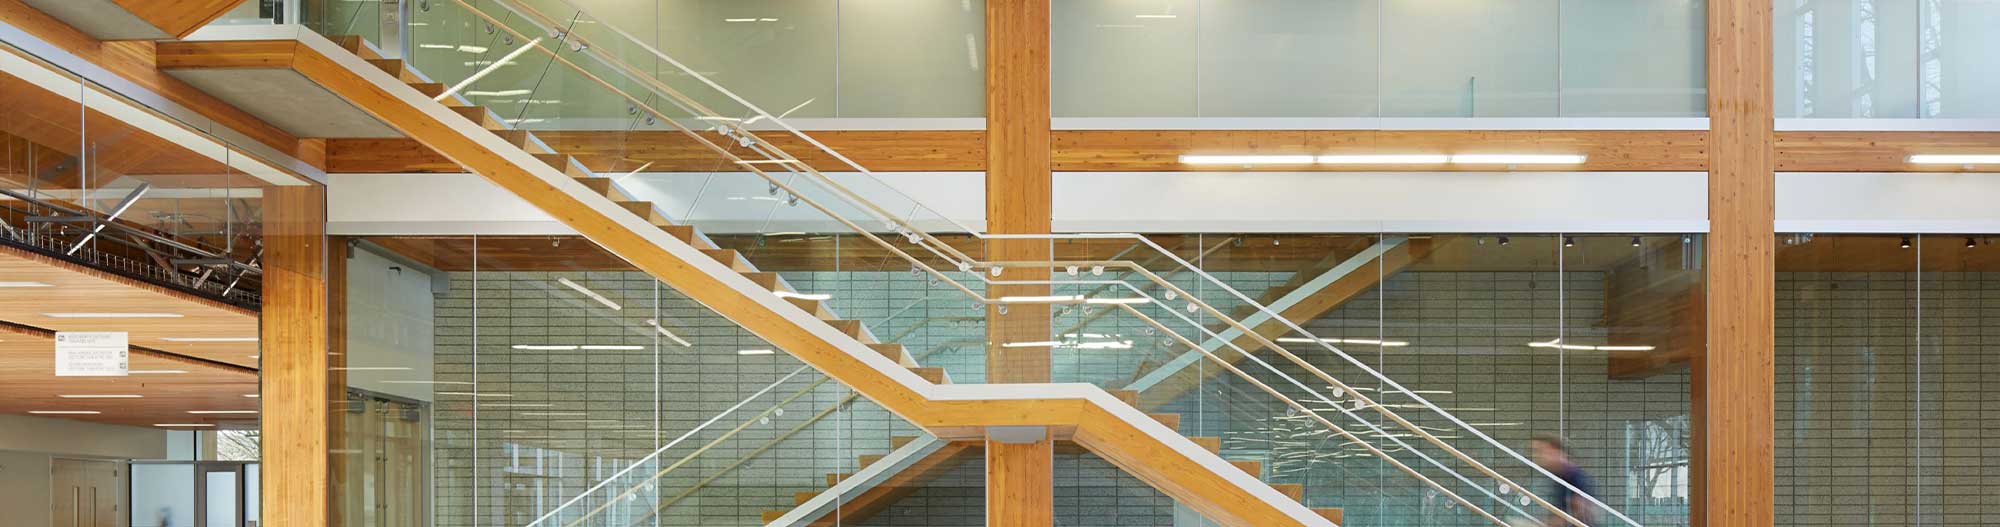 Interior of Earth Sciences Building featuring wood construction